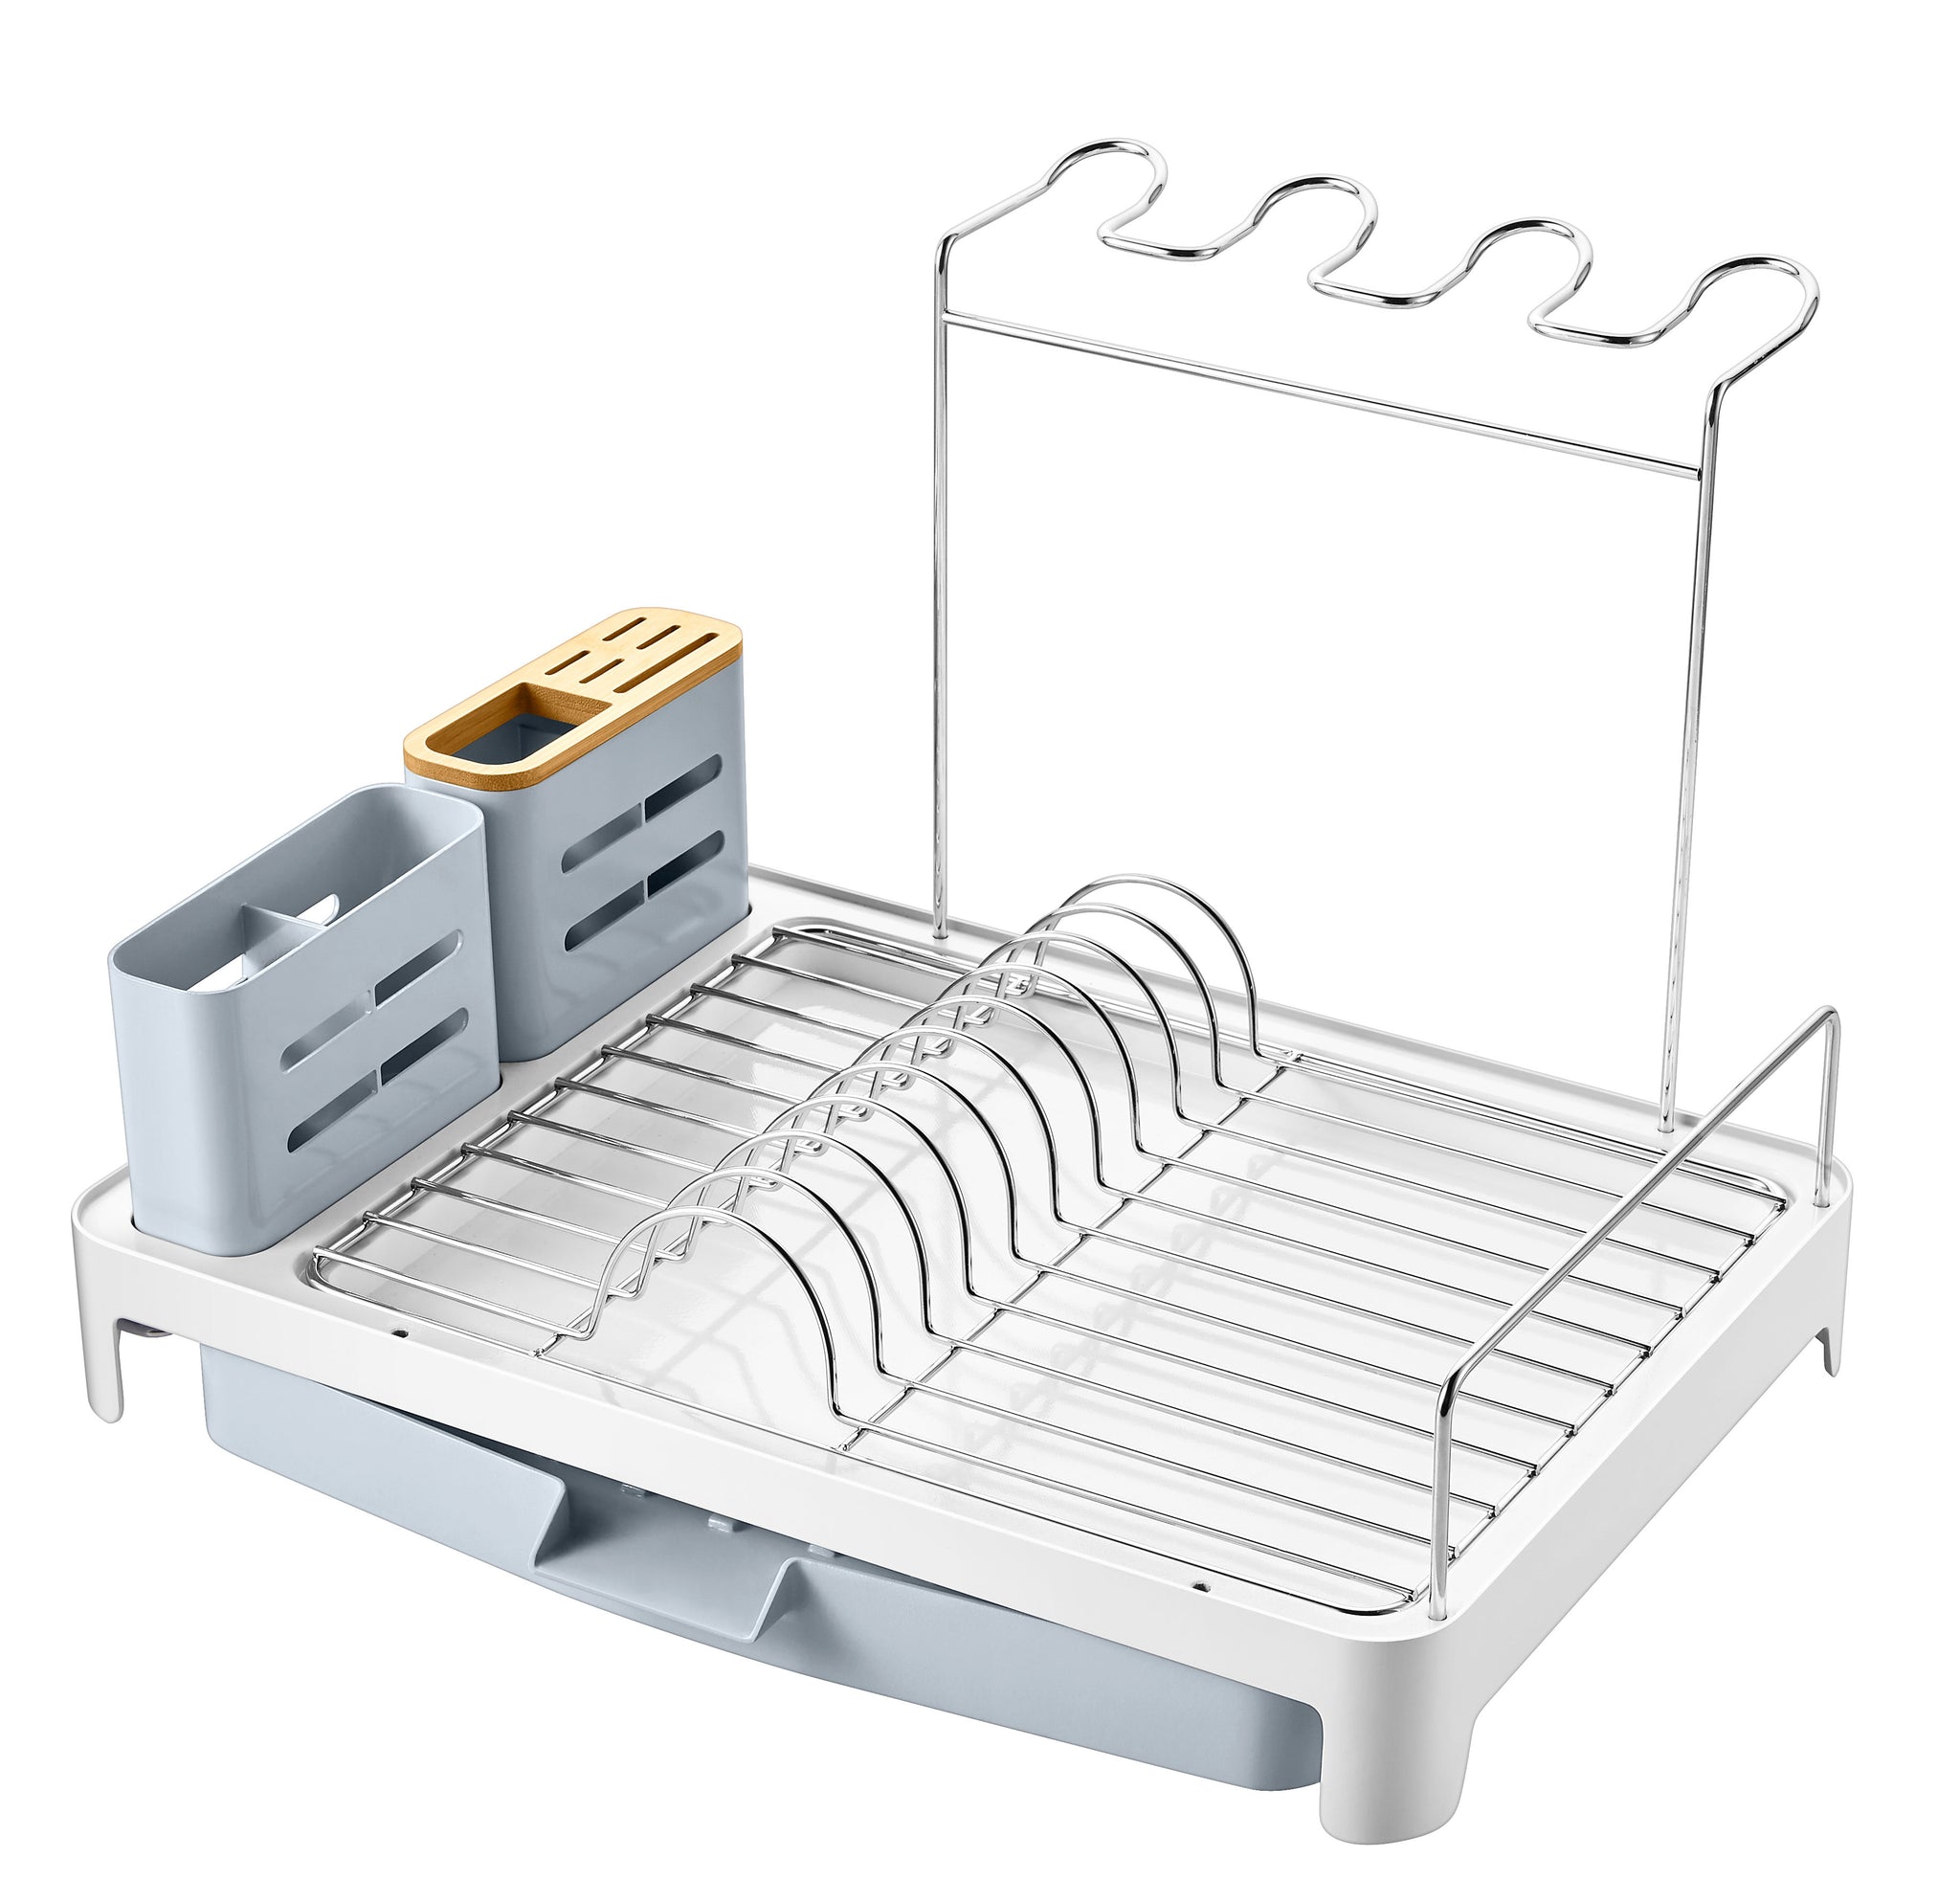 VNKZI Dish Drying Rack, 2 Tier Stainless Steel Multifunctional Large Dish  Rack with Drainboard Set, Wine Glass Holder, Utensil Cutting Board Holder